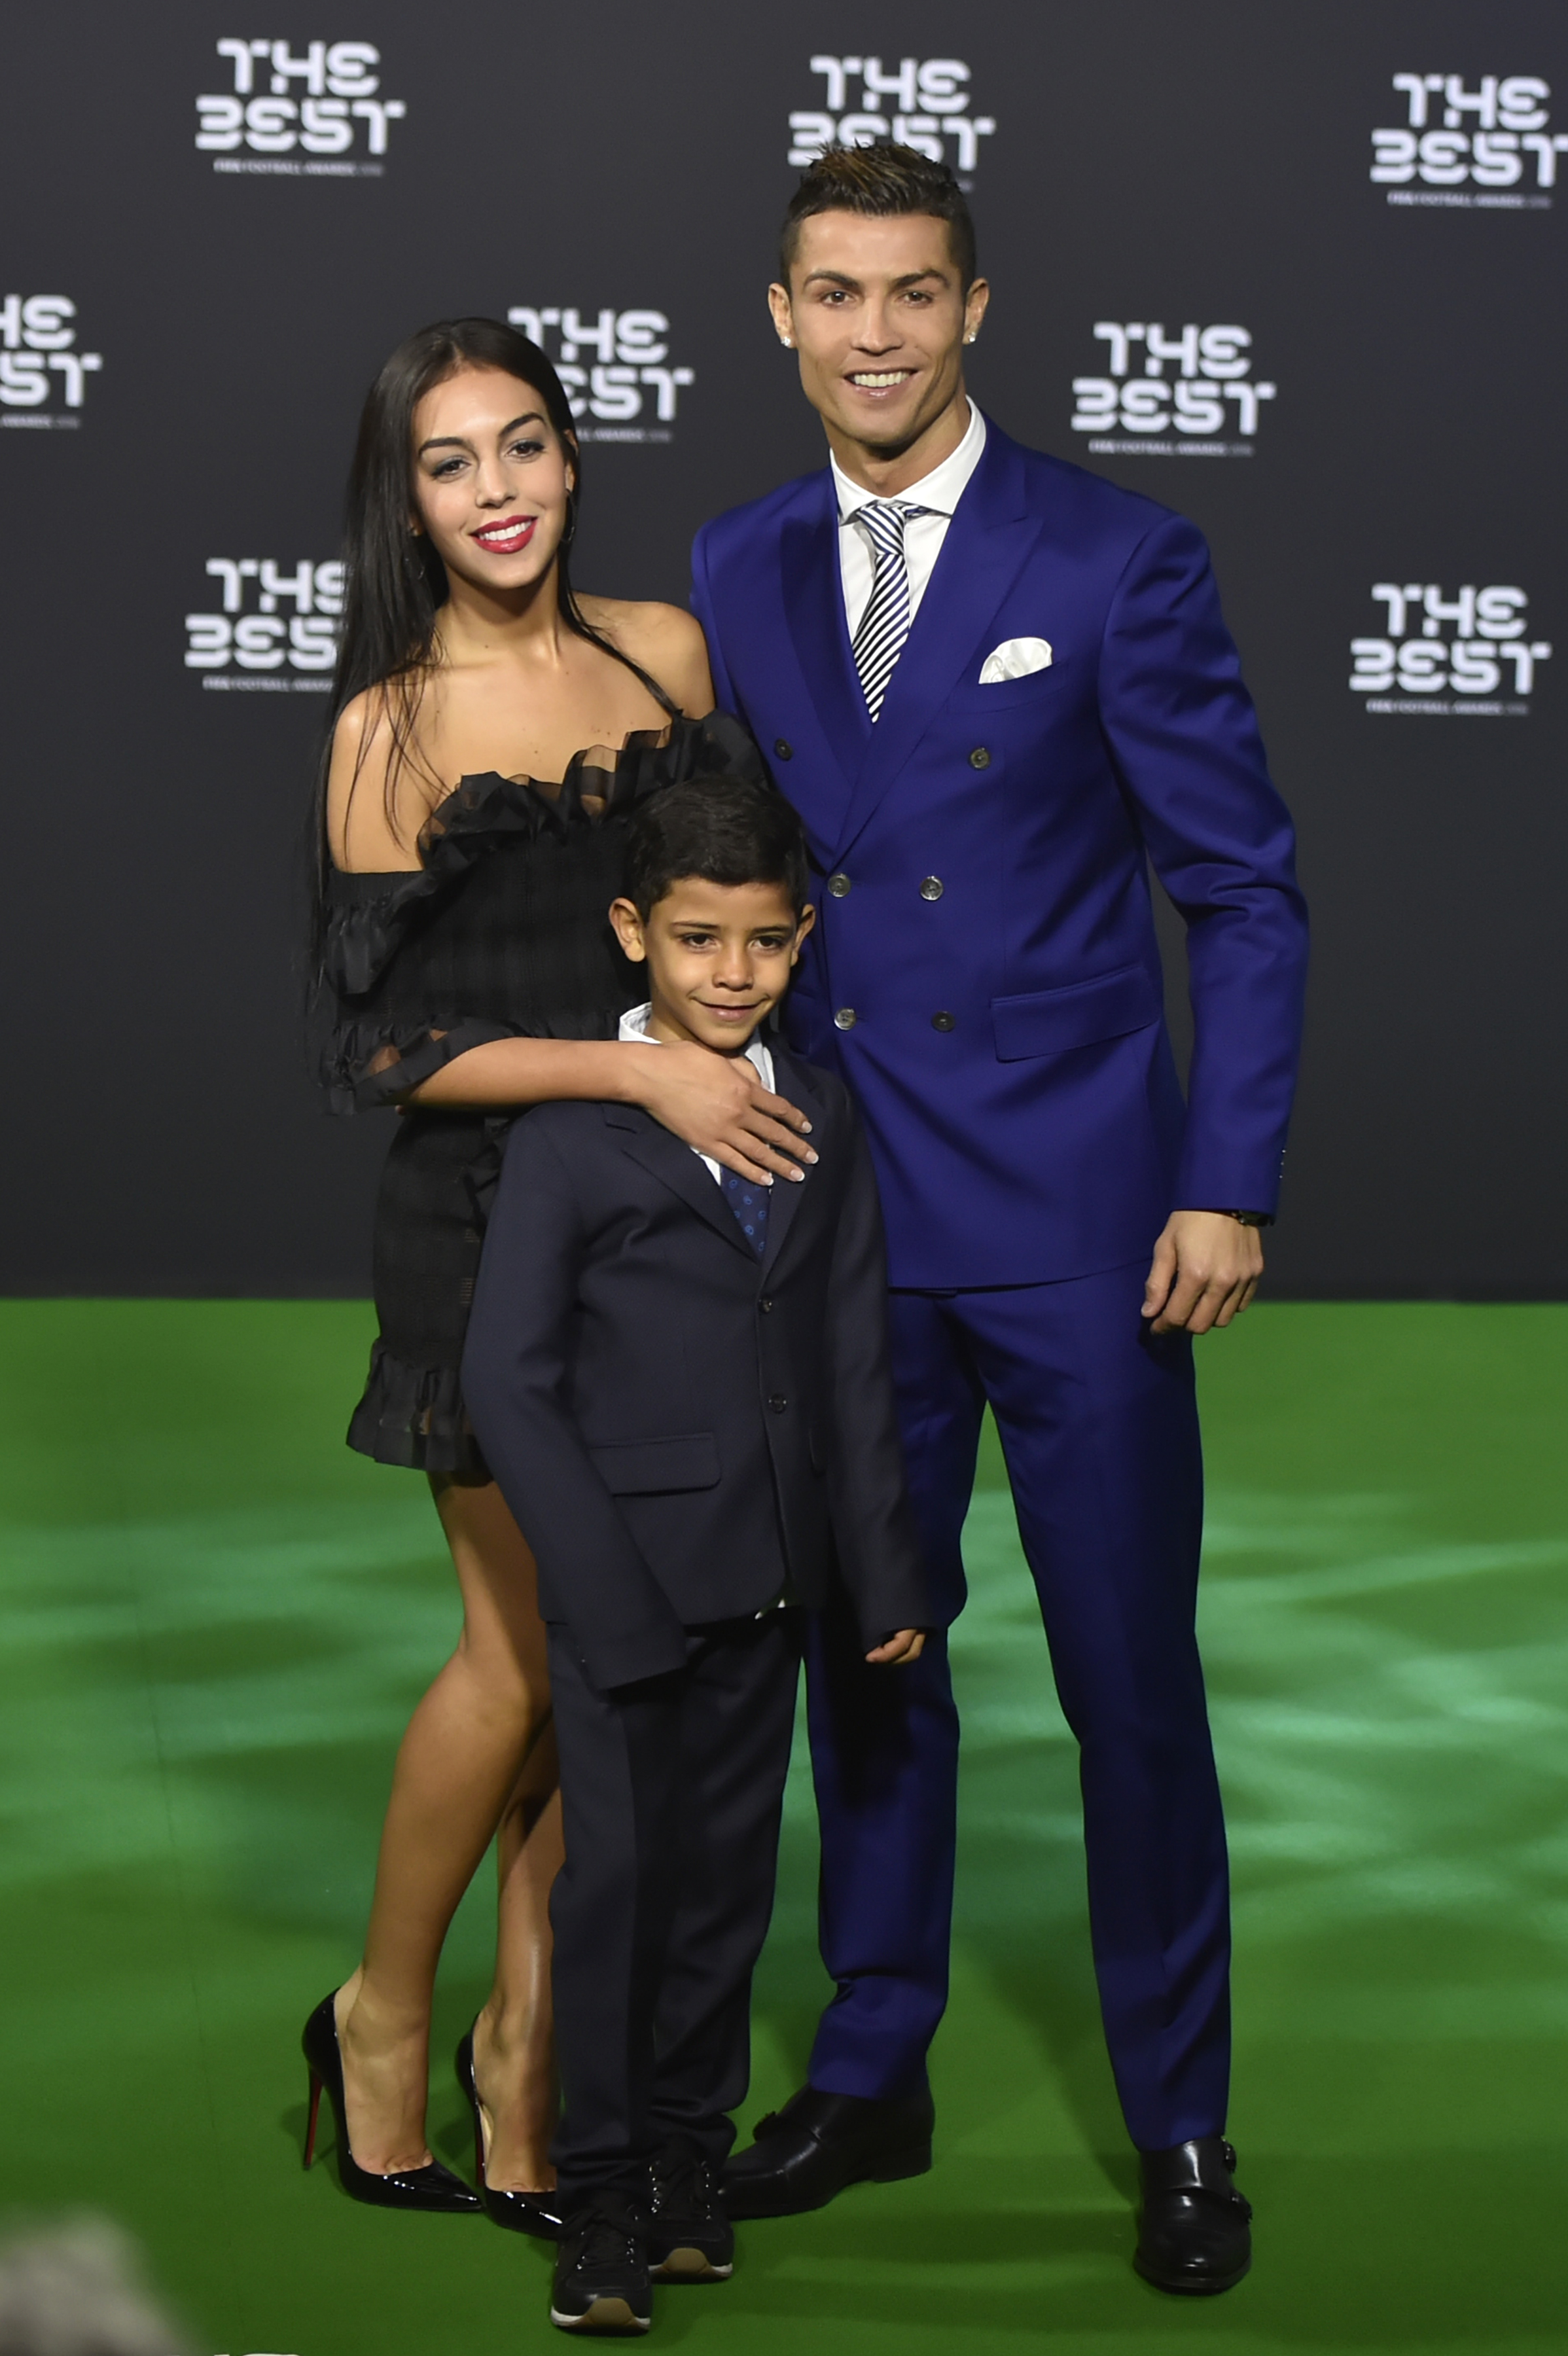 Cristiano Ronaldo with Georgina Rodriguez and his son Cristiano Ronaldo Jr. as they arrive for The Best FIFA Football Awards 2016 ceremony, on January 9, 2017, in Zurich | Source: Getty Images